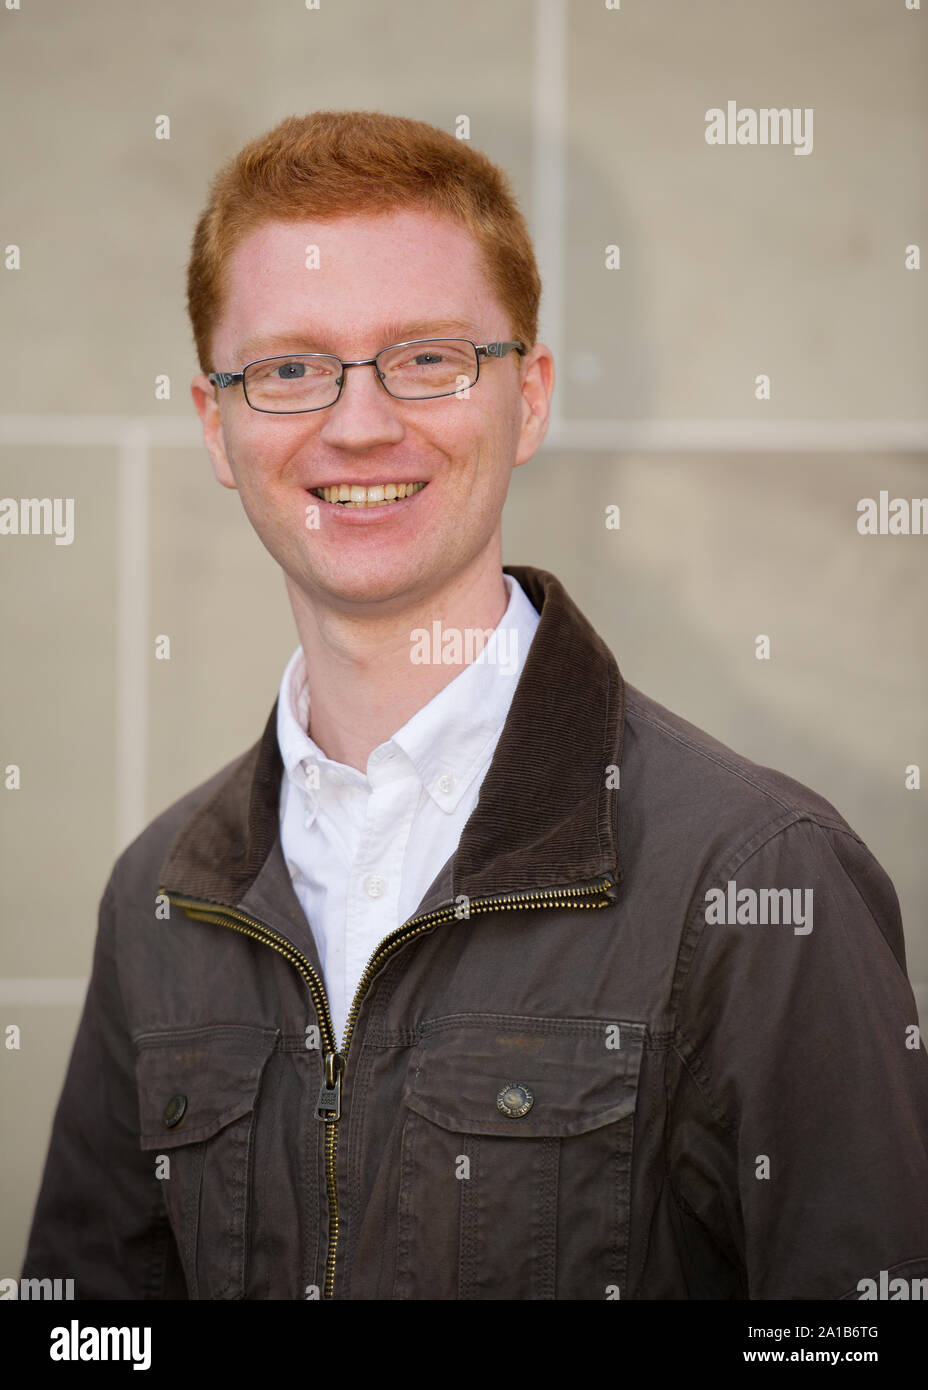 Glasgow, UK. 20 September 2019.  PICTURED: Ross Greer MSP - Scottish Green Party MSP for Wast of Scotland, External Affairs, Educations & Skills, Culture & Media. Colin Fisher/CDFIMAGES.COM Stock Photo